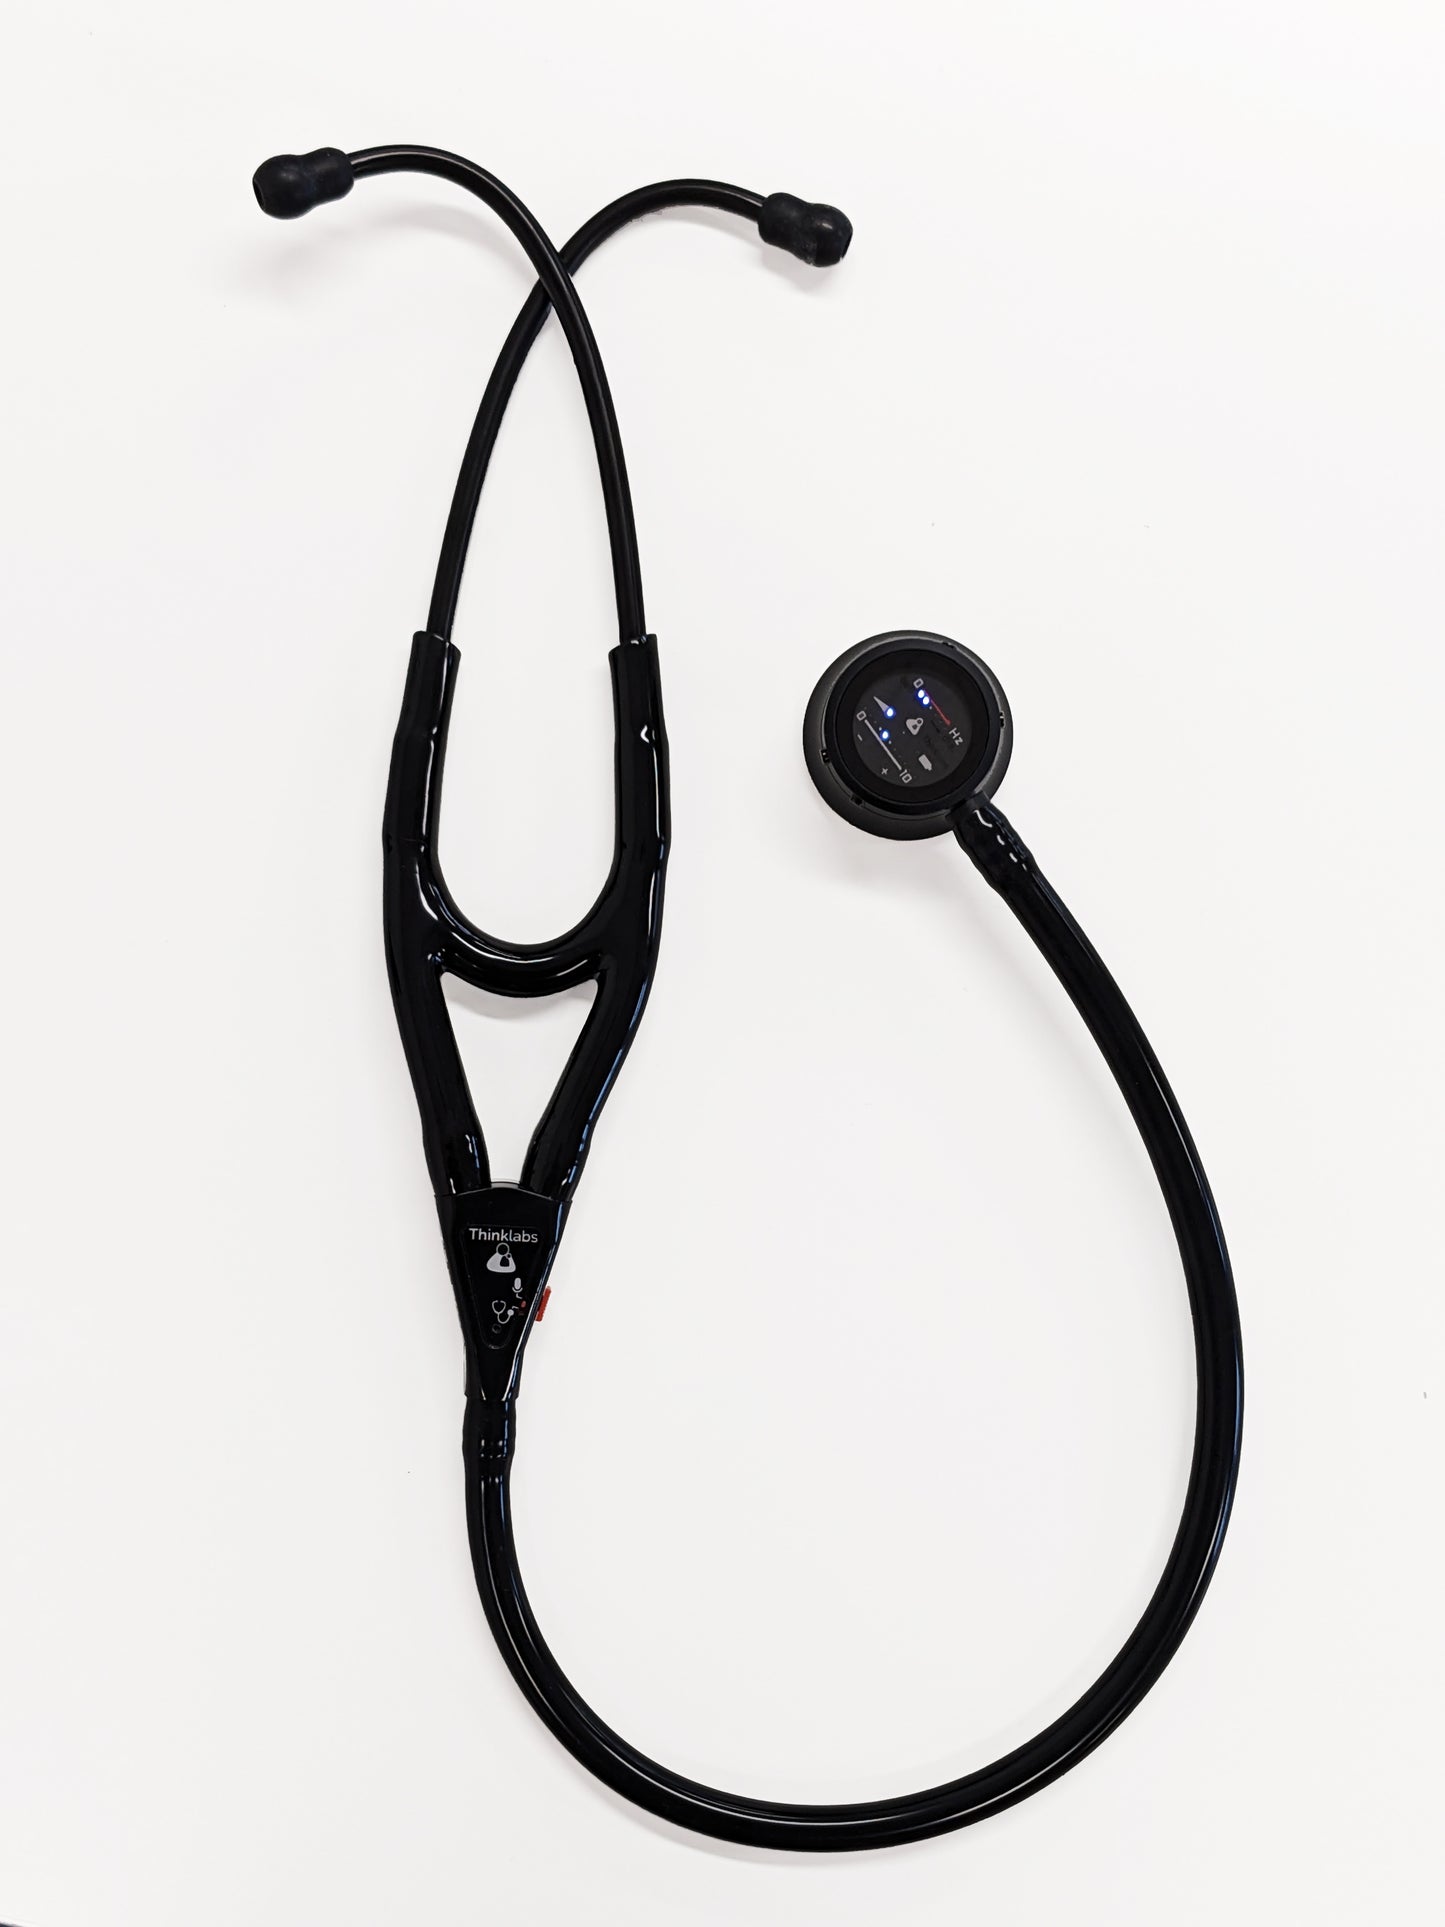 Thinklabs Y One Stethoscope Headset